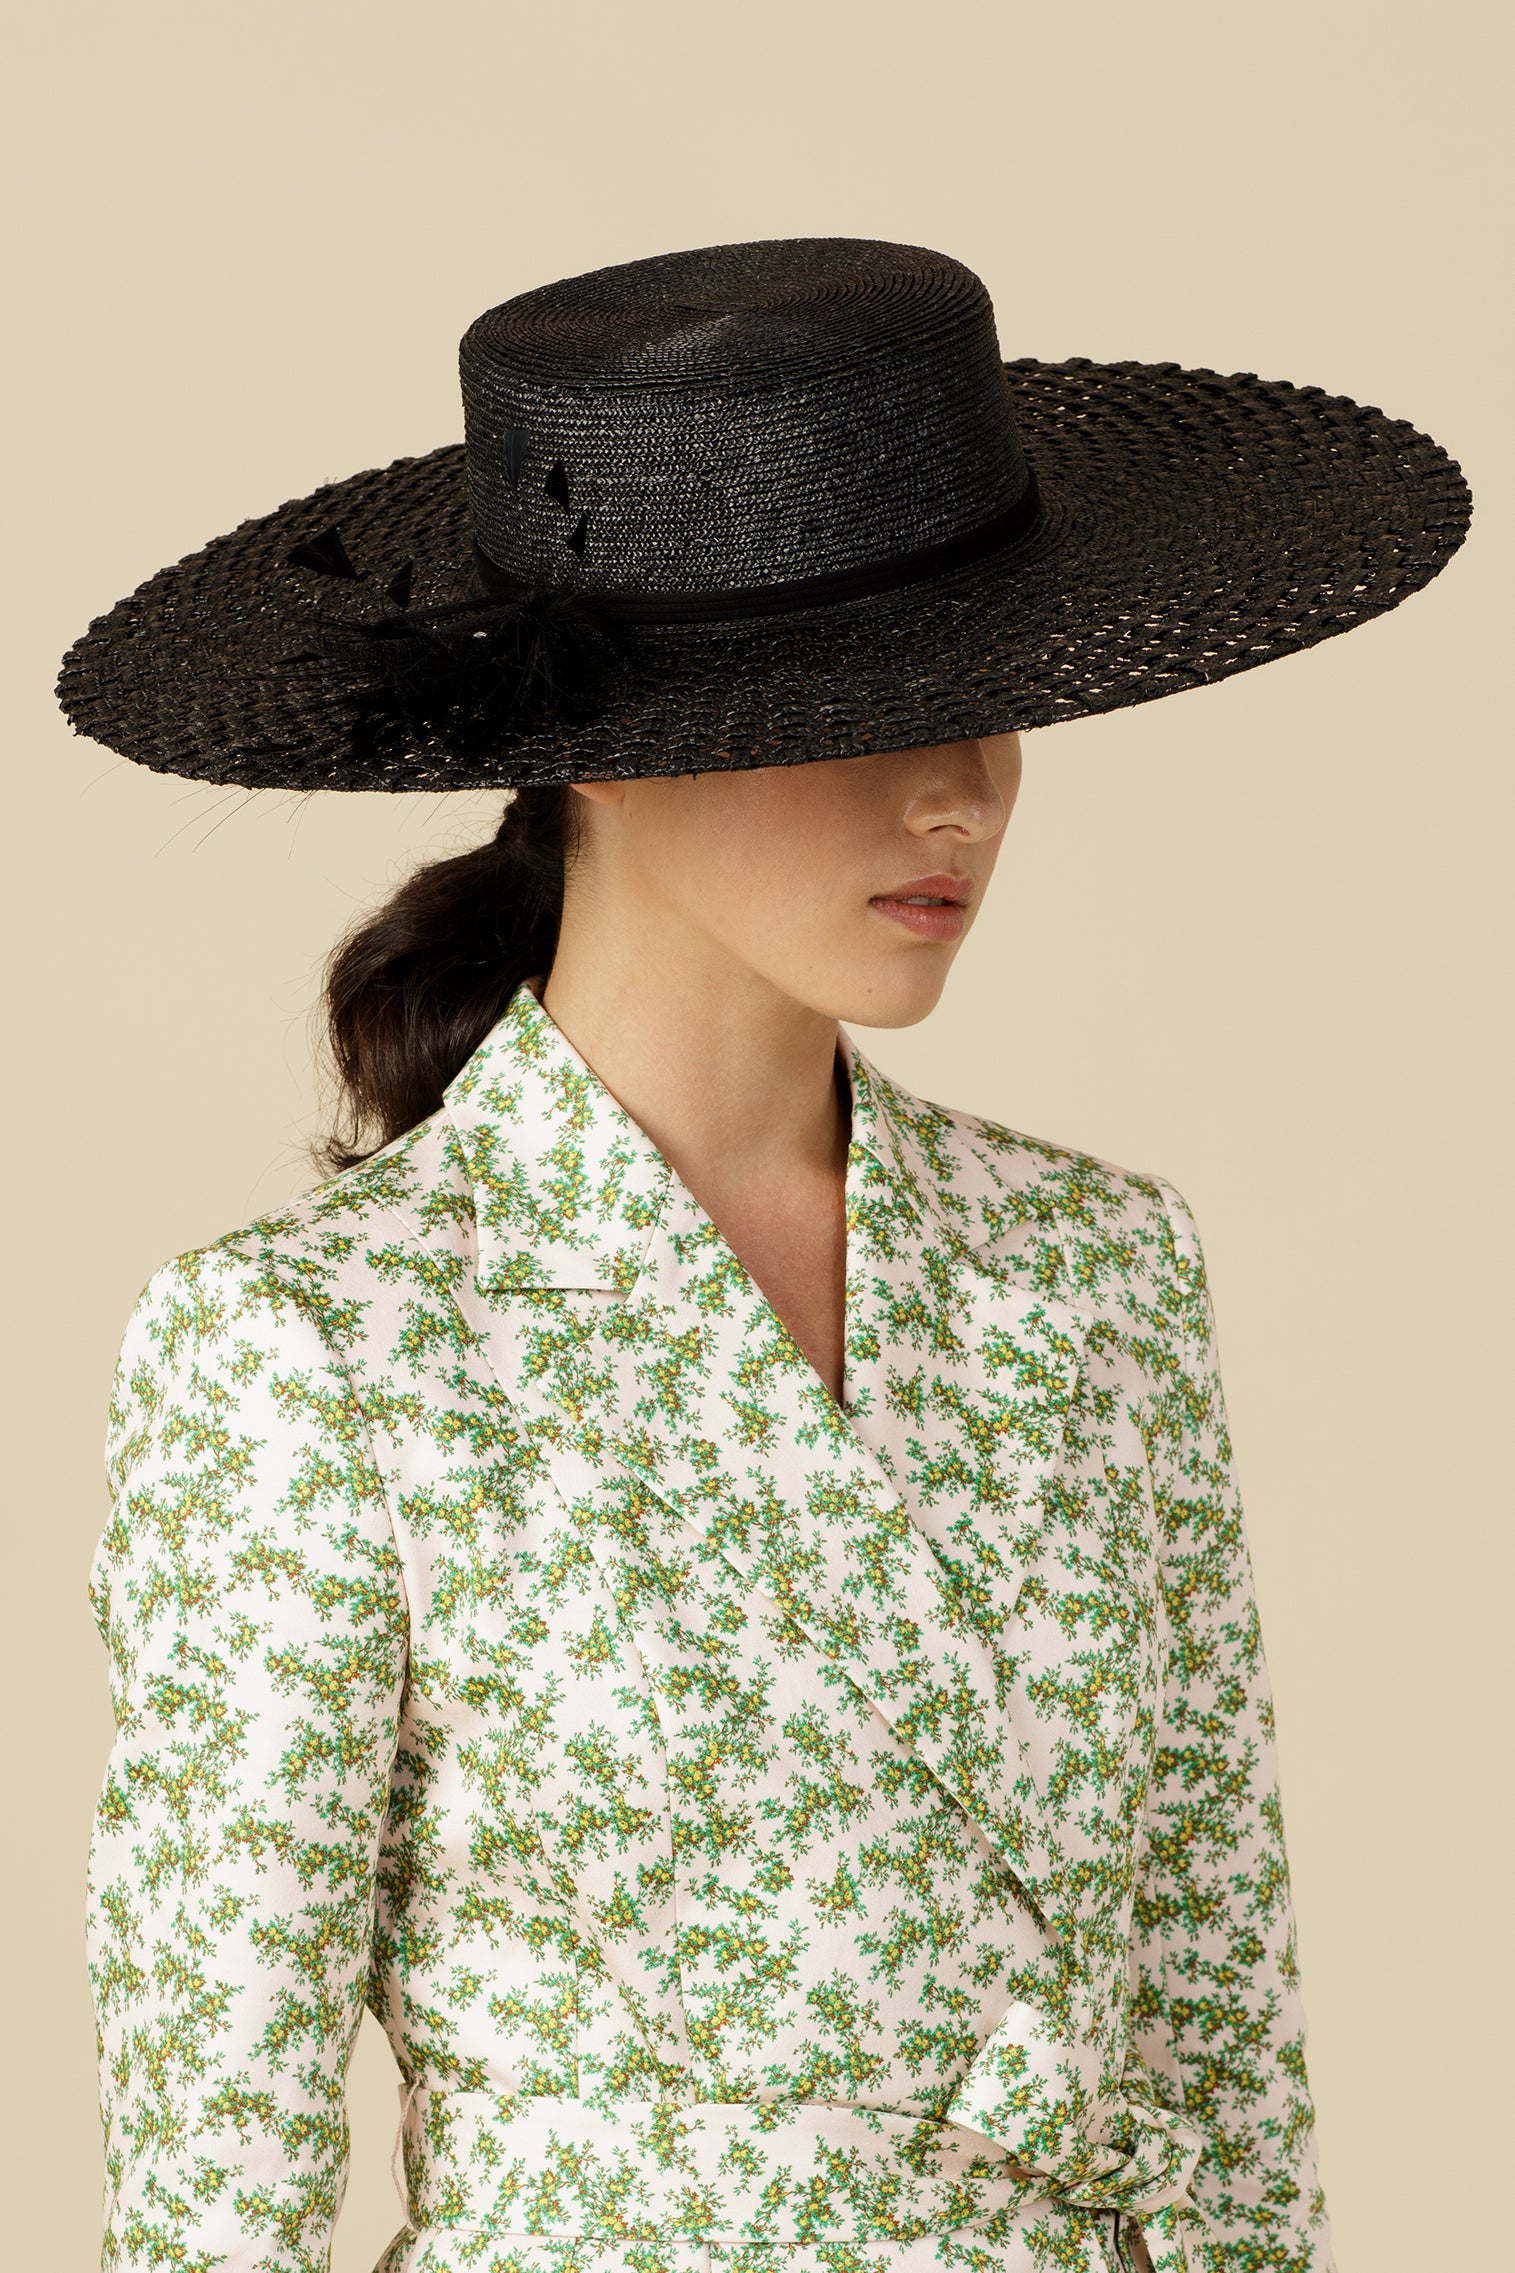 Mayer Boater - Lock Couture by Awon Golding - Lock & Co. Hatters London UK